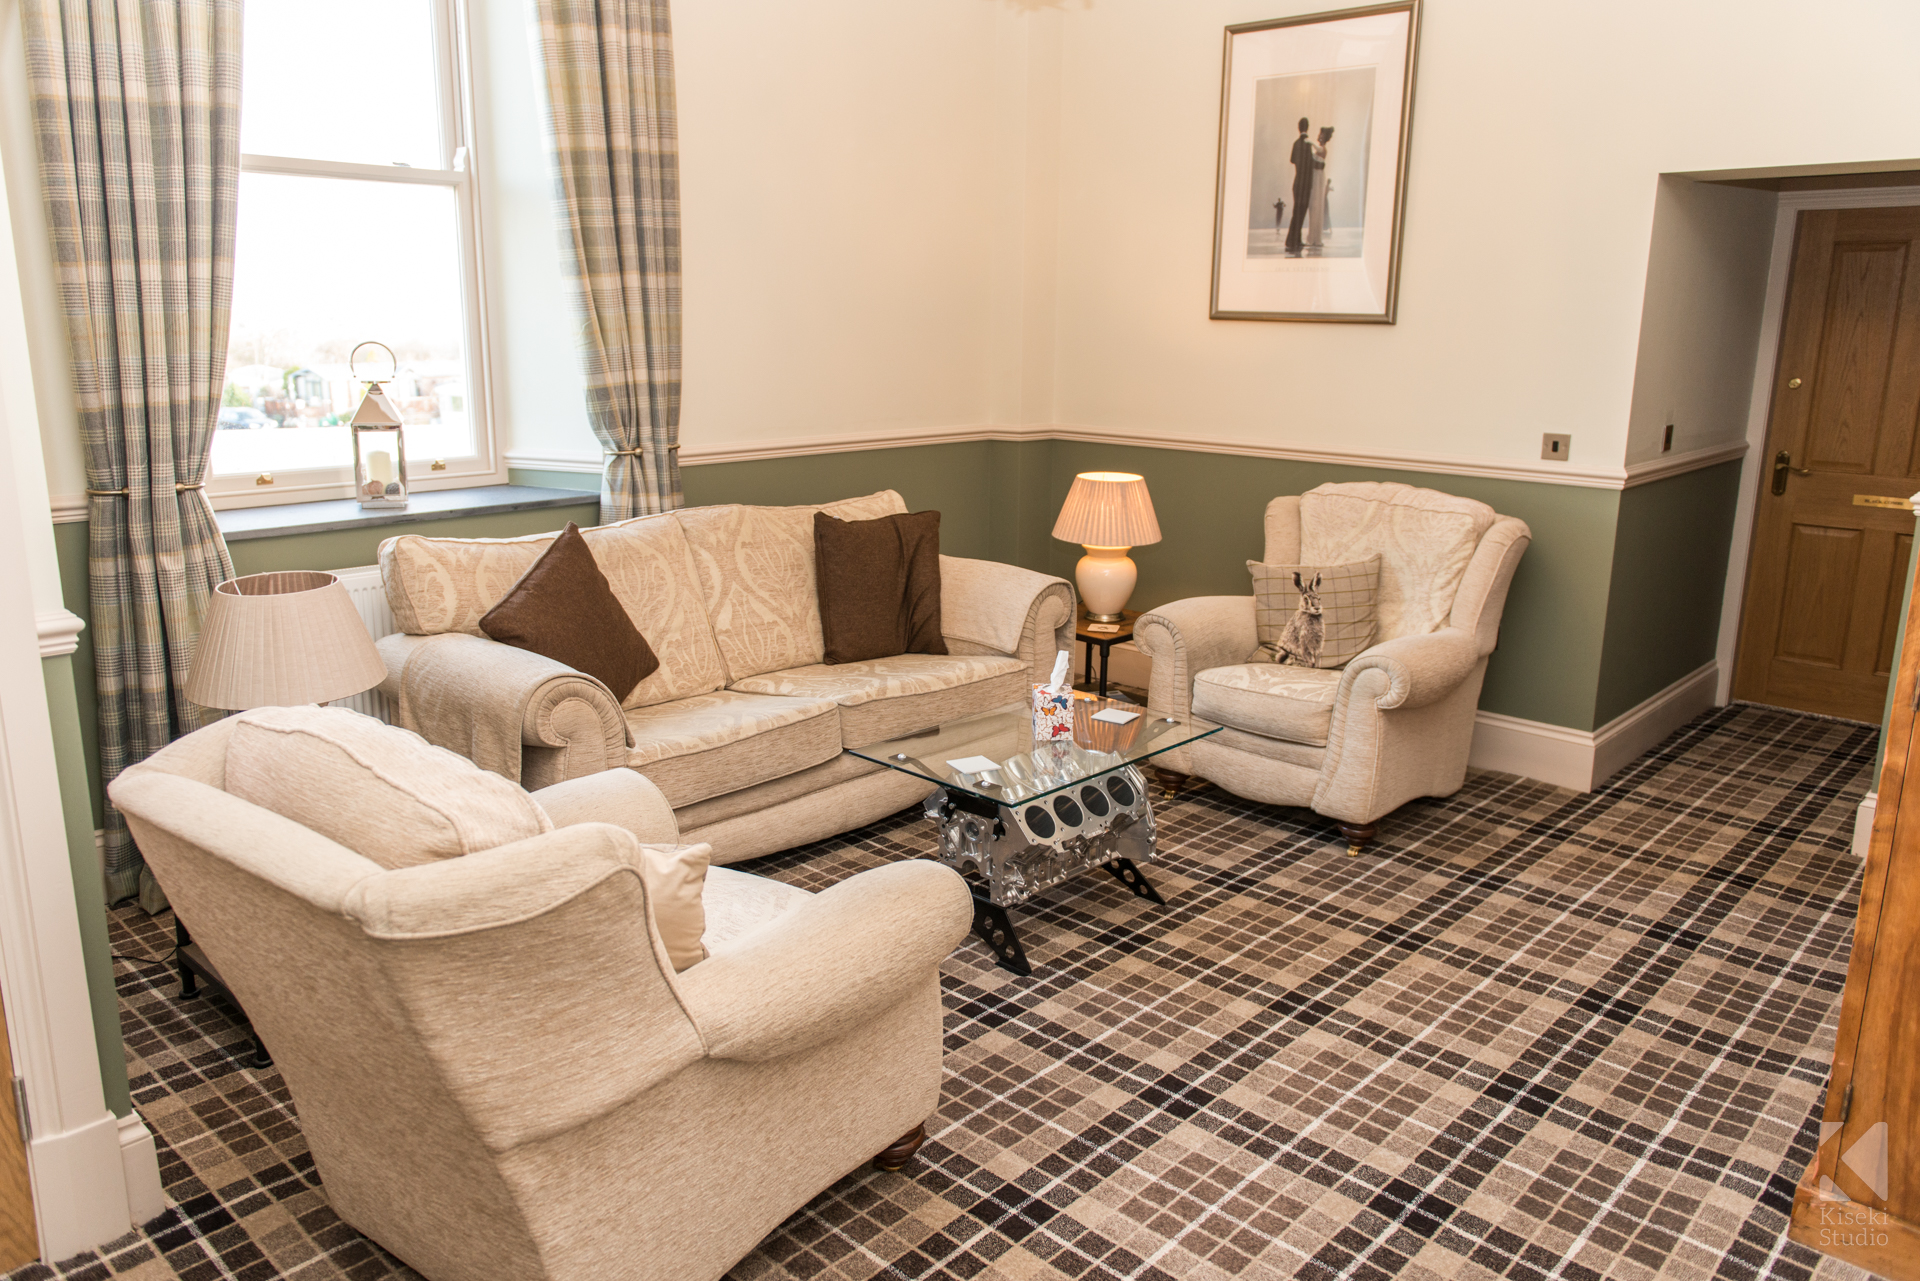 herdwicks-boutique-hotel-lounge-area-relaxing-traditional-lake-district-photography